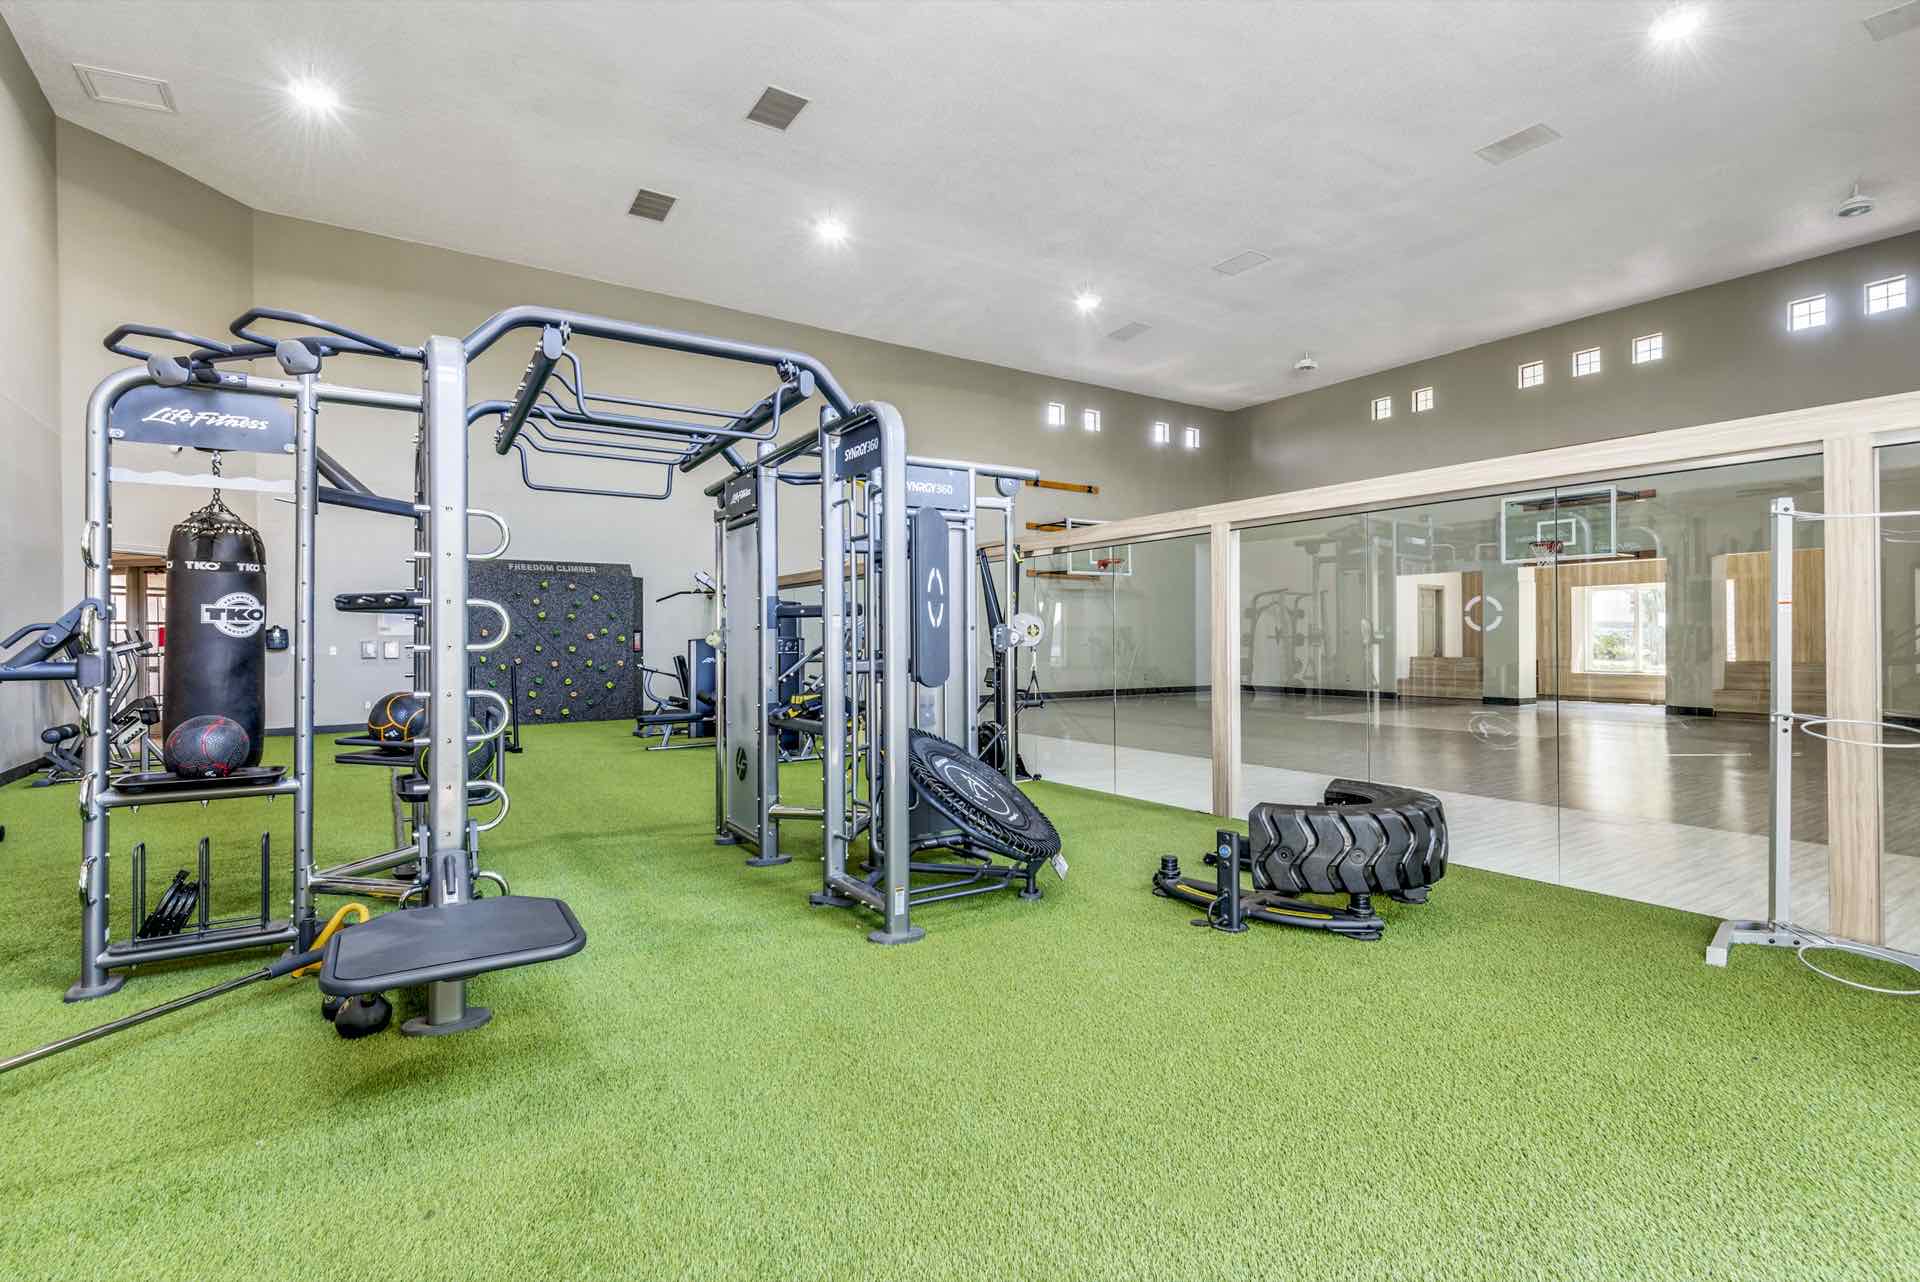 Weight room with artificial turf, climbing wall, punching bag, and indoor basketball court